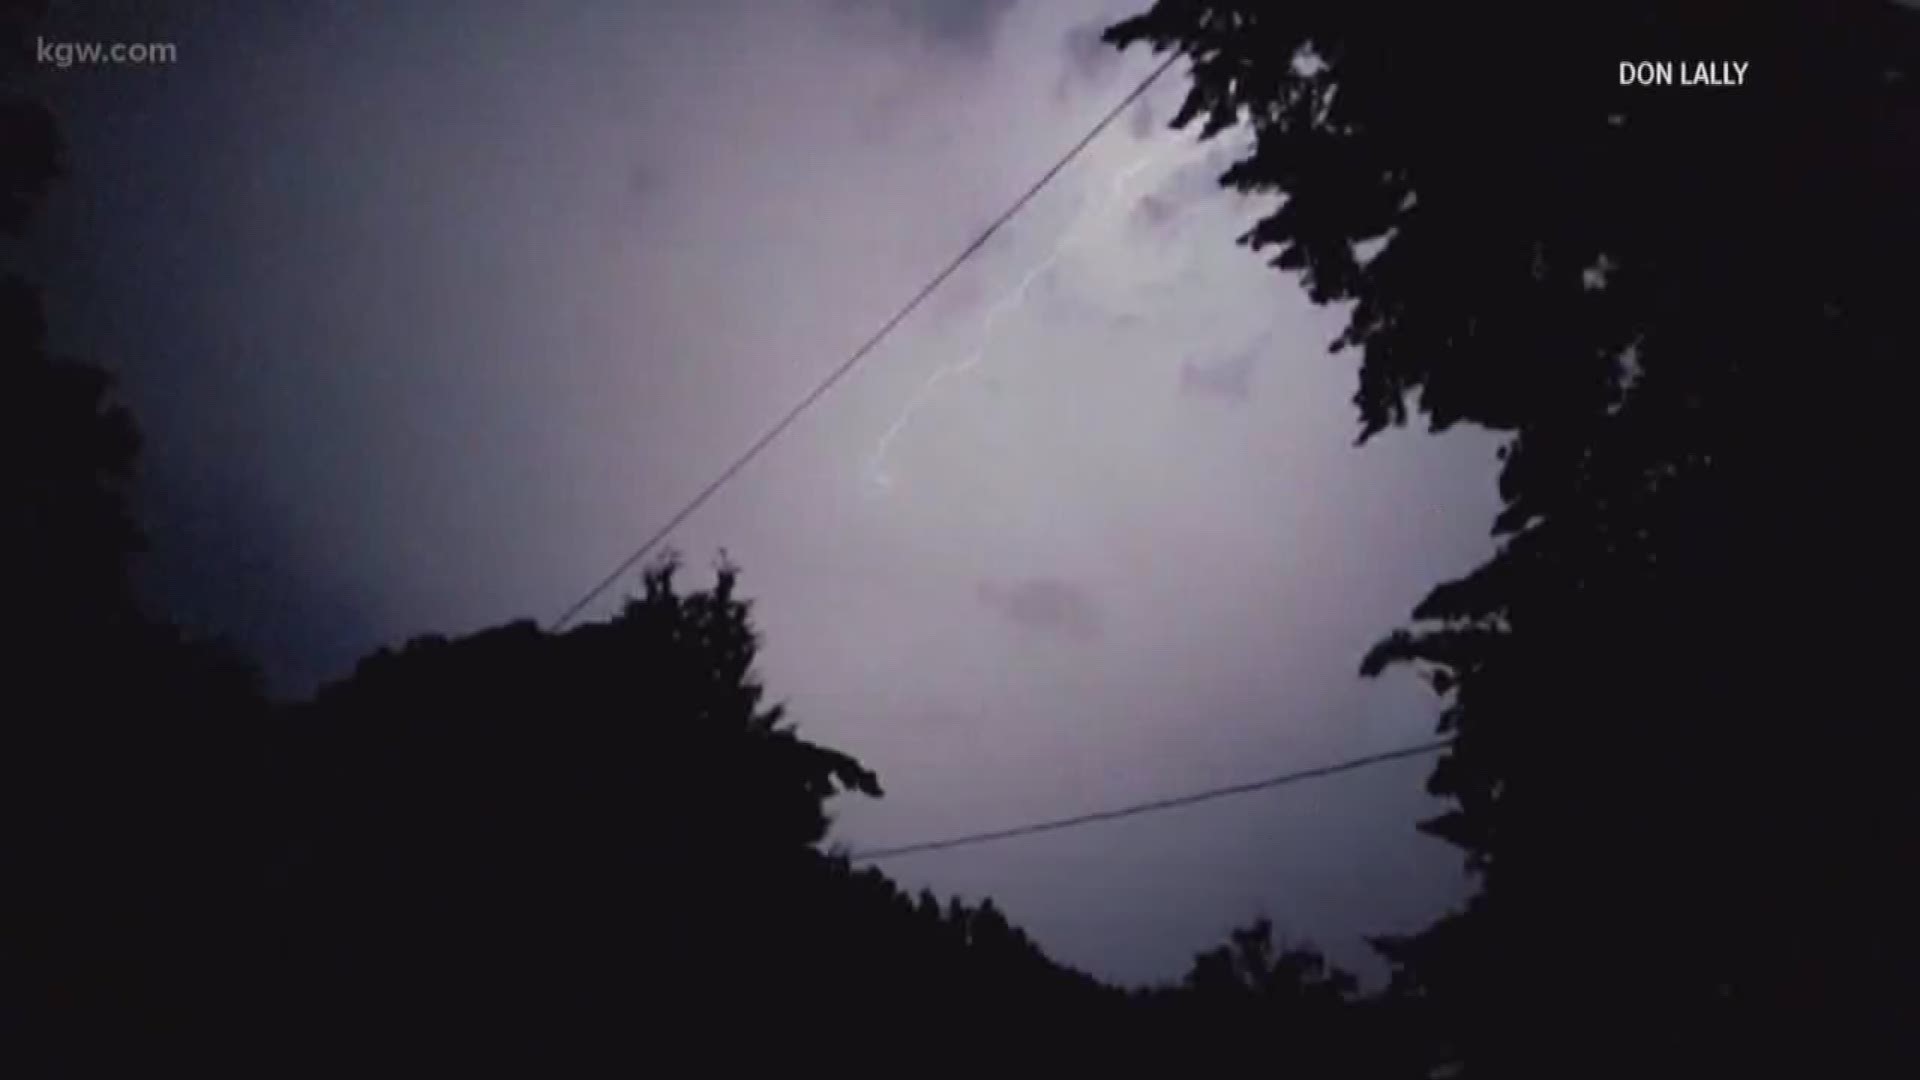 A KGW viewer, Don Lally, sent in this video of lightning in Tigard, Oregon on Wednesday, June 21, 2018.